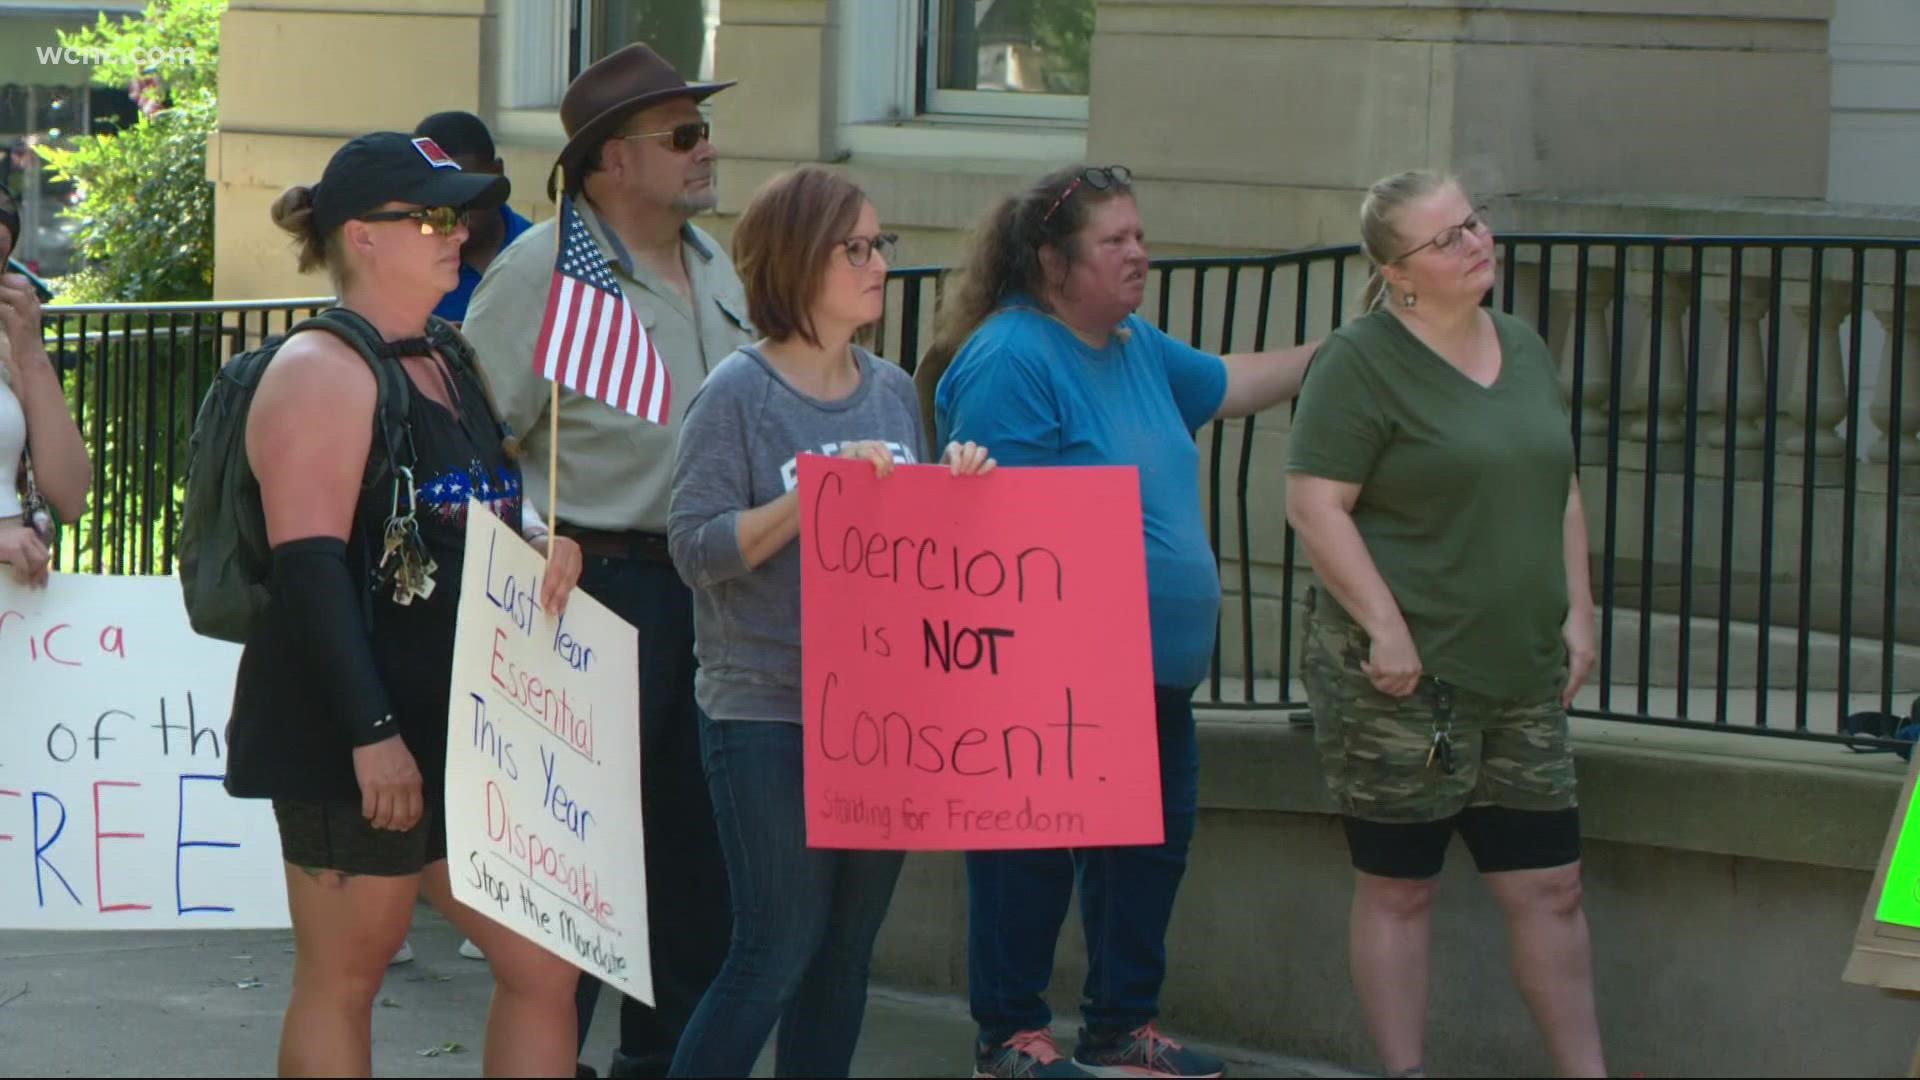 Many of them were nurses and other healthcare professionals who made their voices heard in the decision for mandated vaccinations.